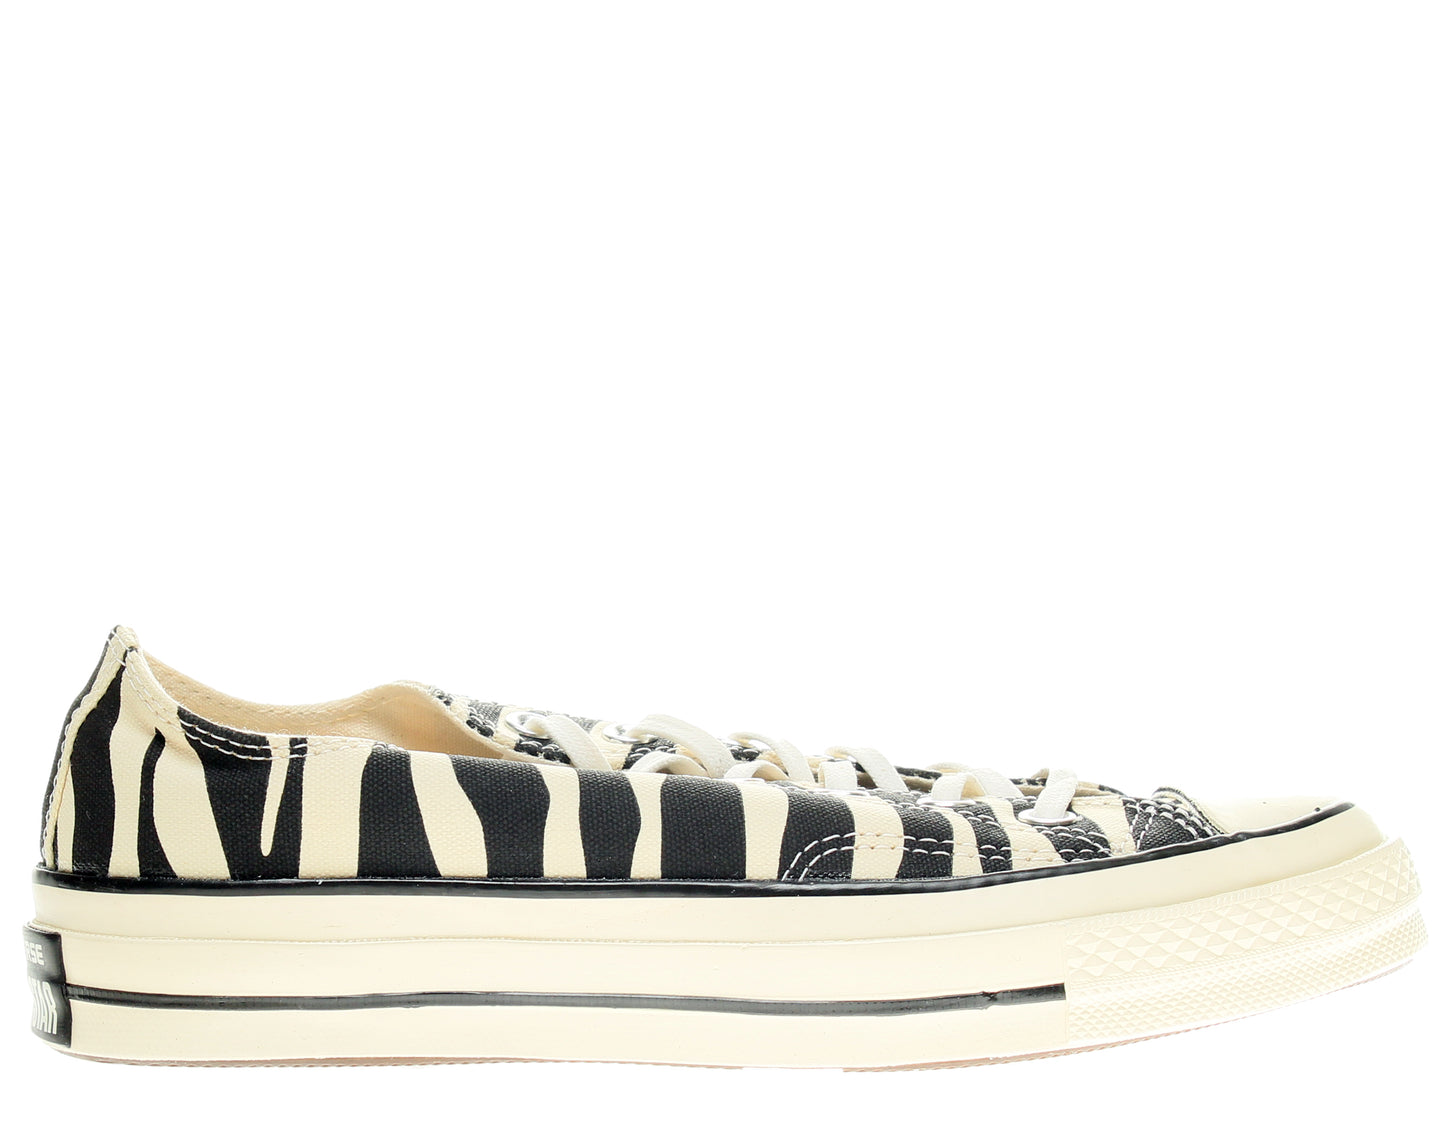 Converse Chuck Taylor All Star OX 70' Zebra Low top Sneakers